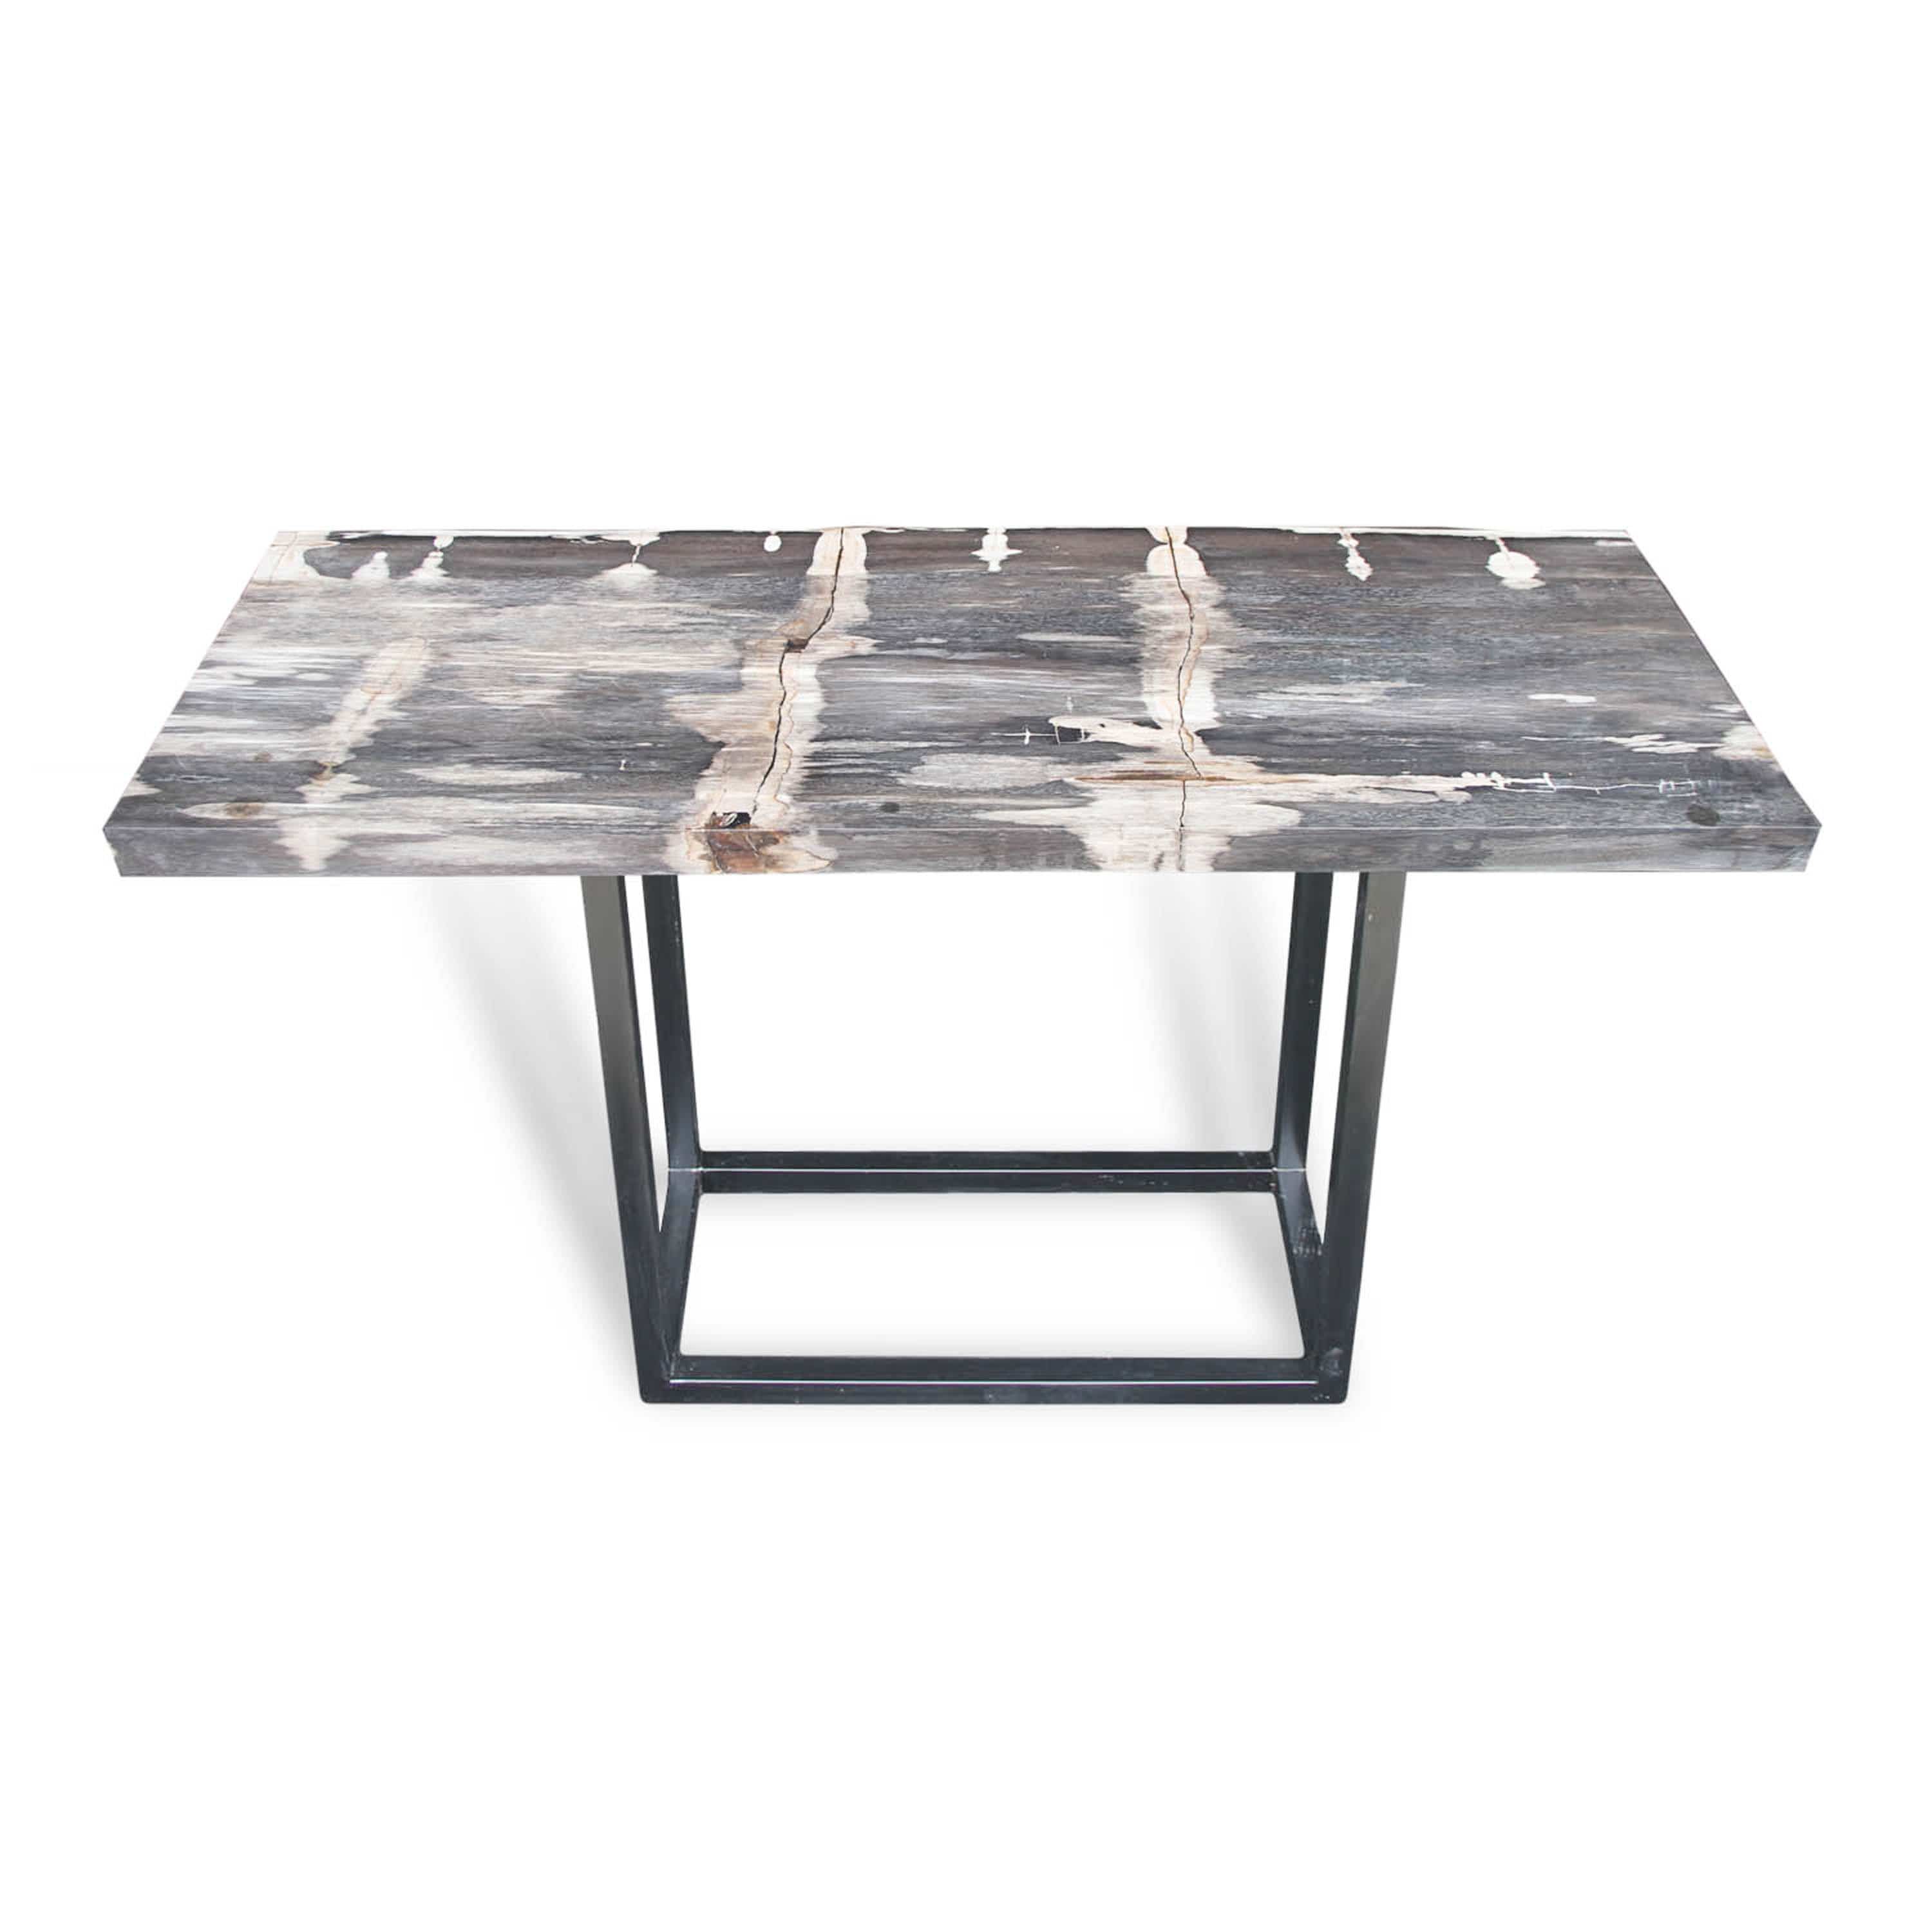 Kalifano Petrified Wood Natural Polished Petrified Wood Rectangular Table Top from Indonesia - 55" / 185 lbs PWR10100.001